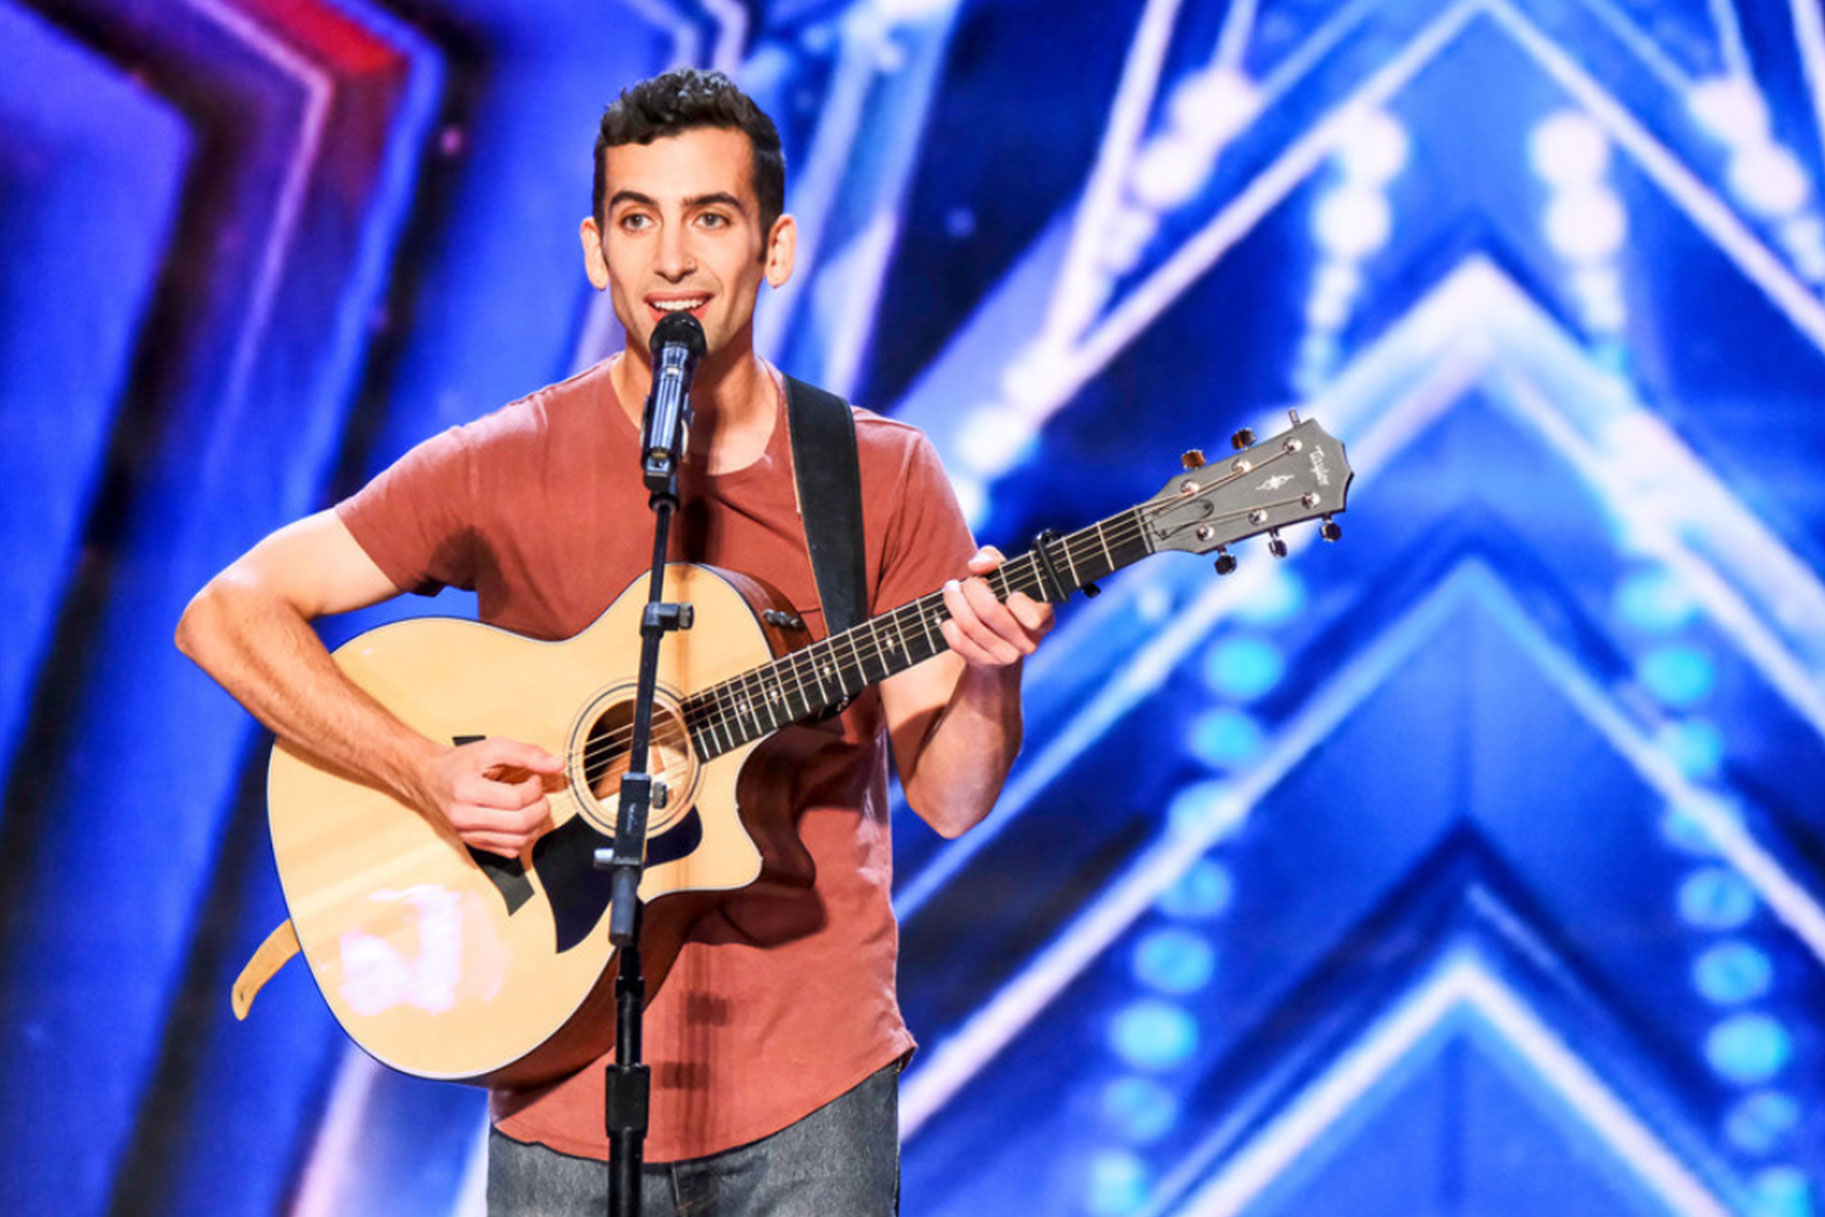 Ben Lapidus performs on the America's Got Talent stage